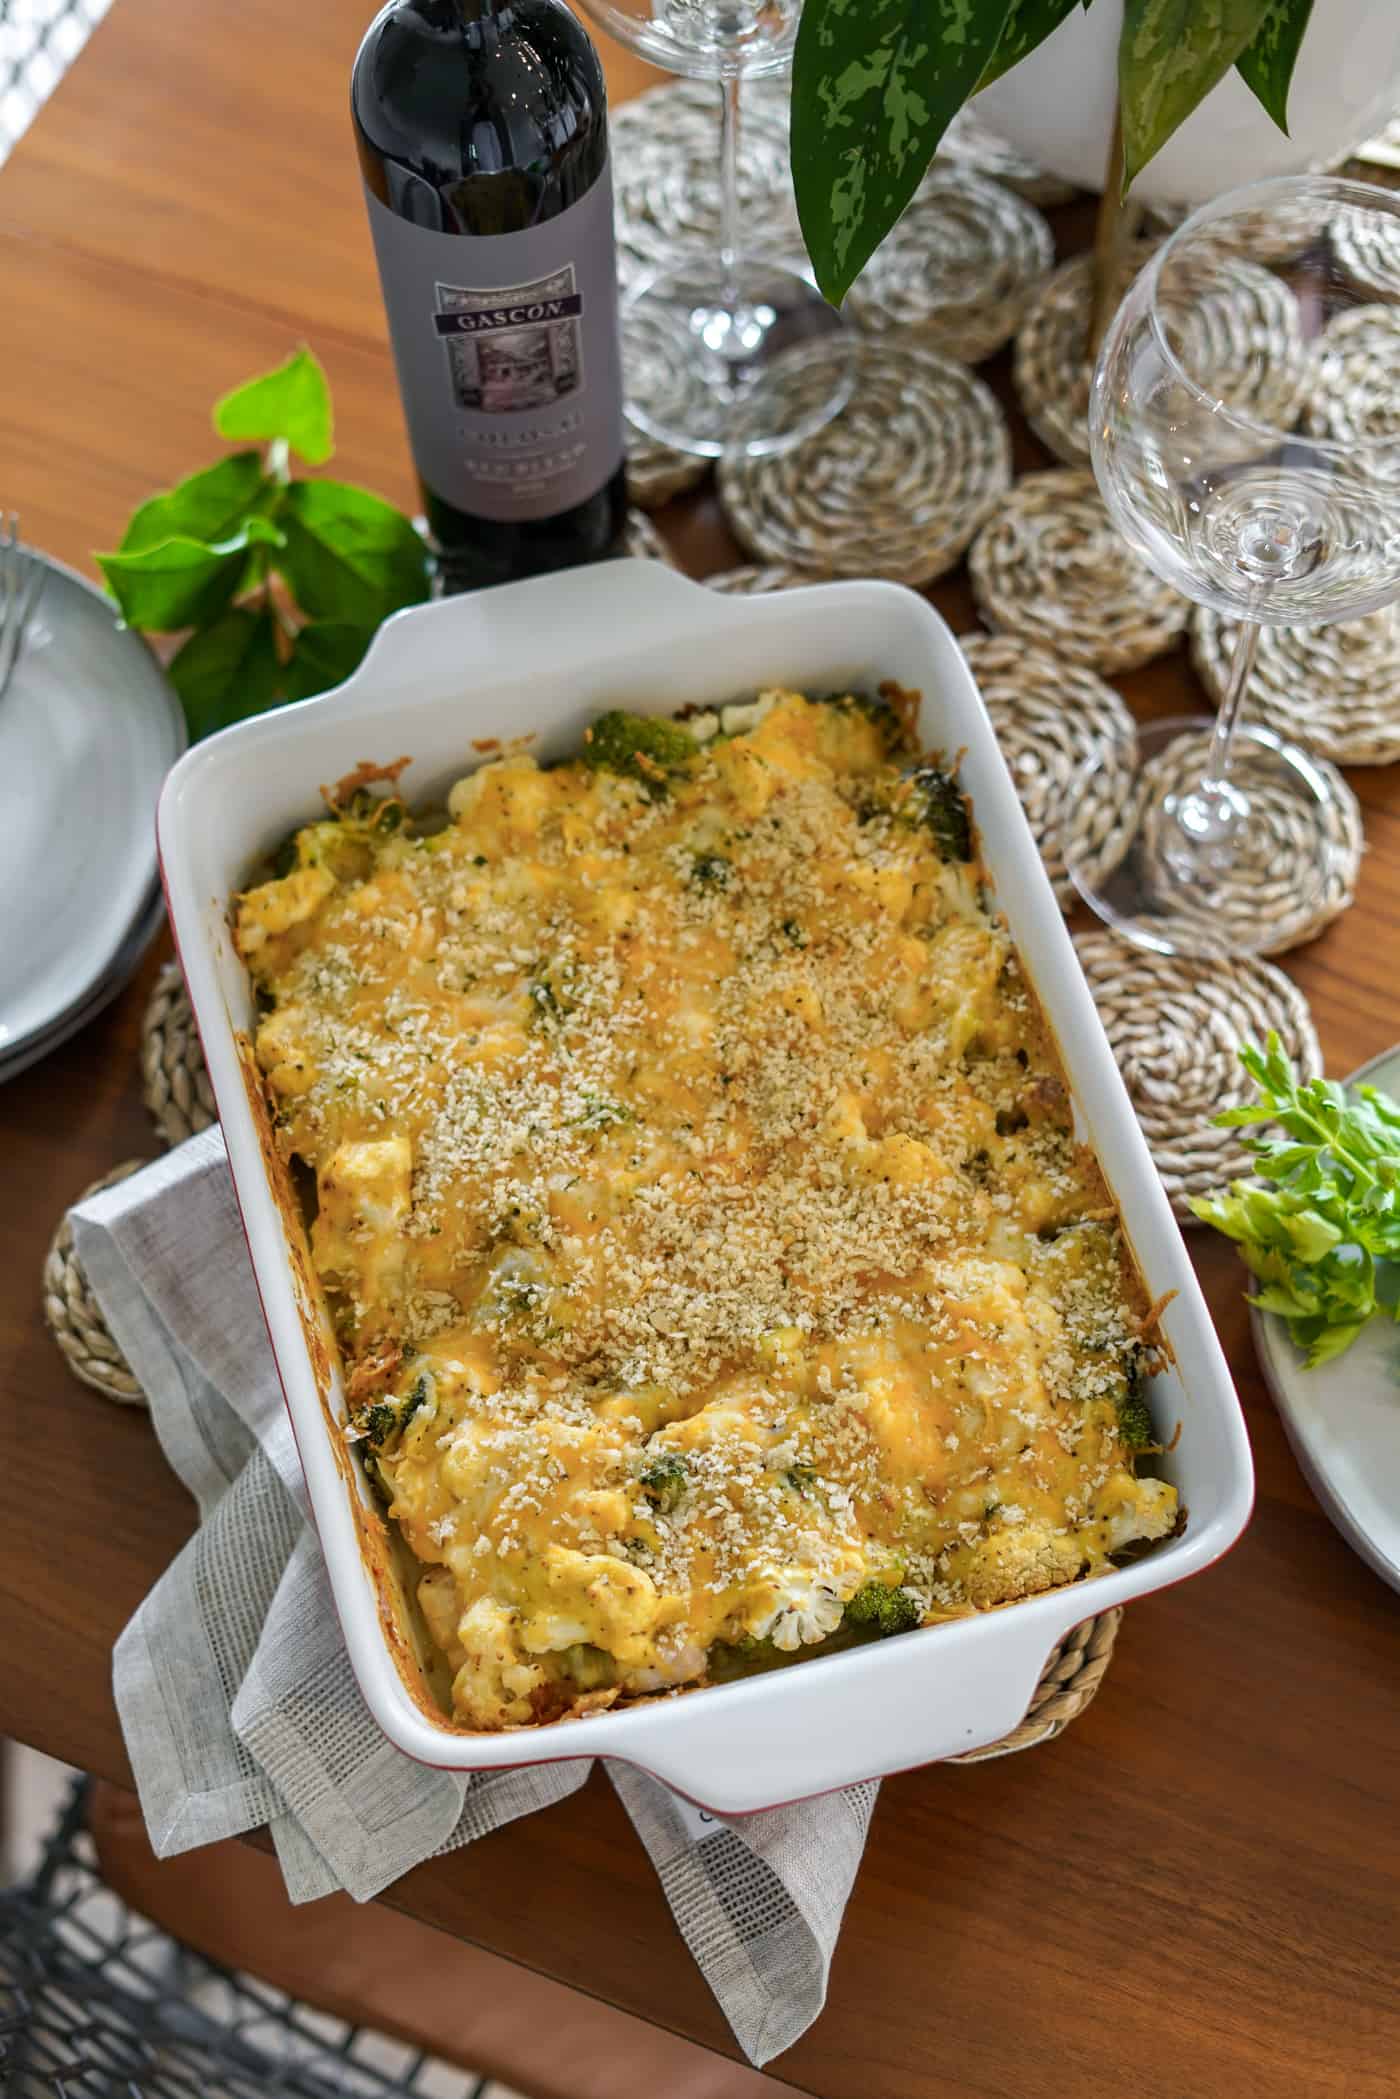 A large casserole dish filled with broccoli chicken casserole recipe on a dining table